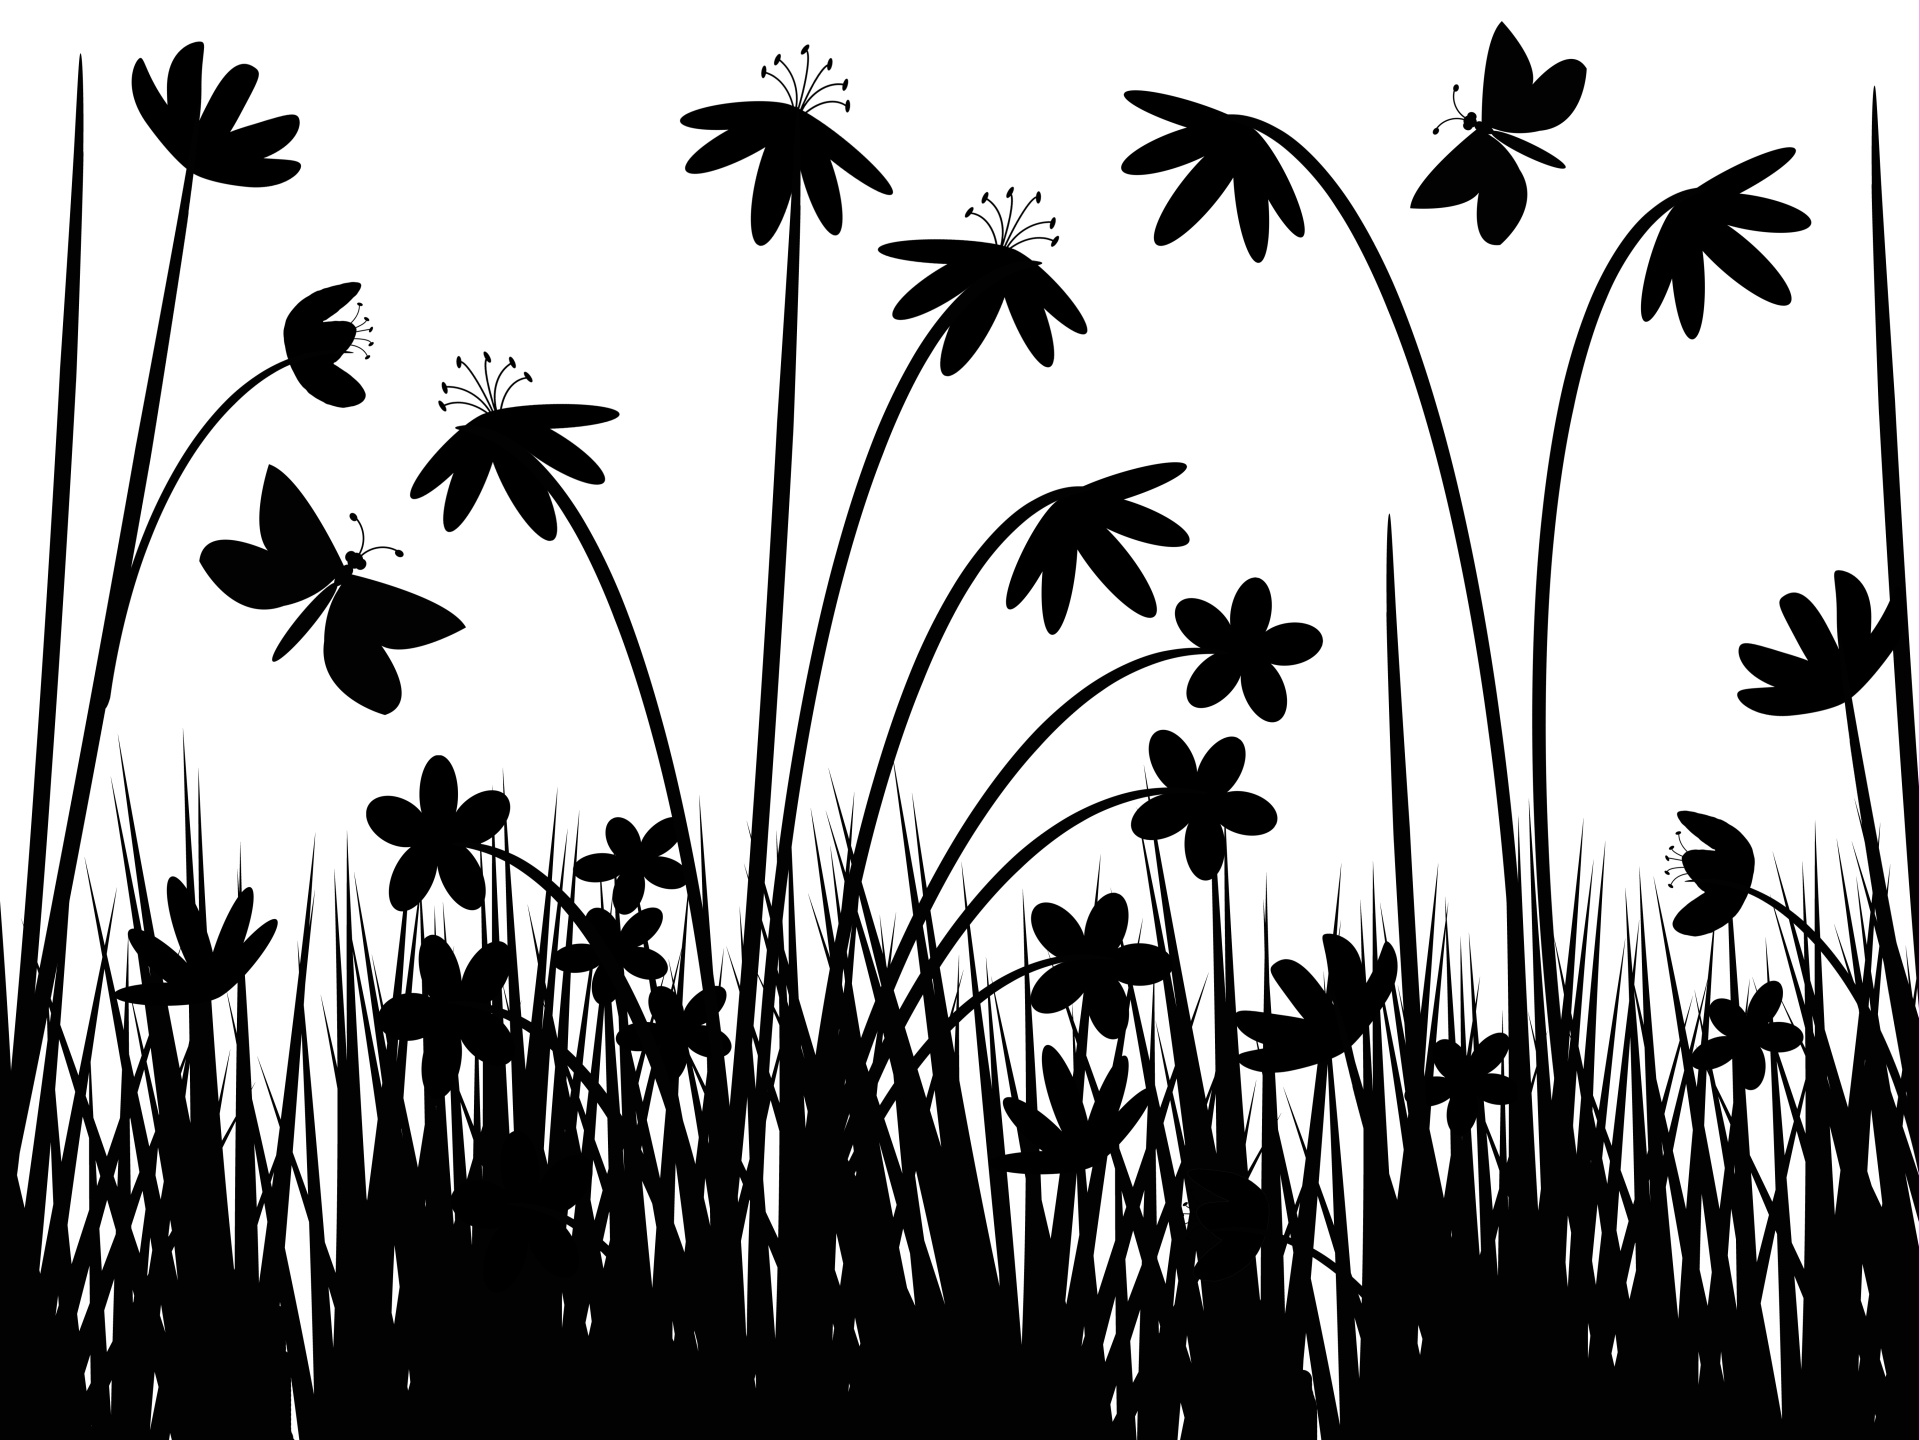 Greyscale flowers wallpapers | Greyscale flowers stock photos